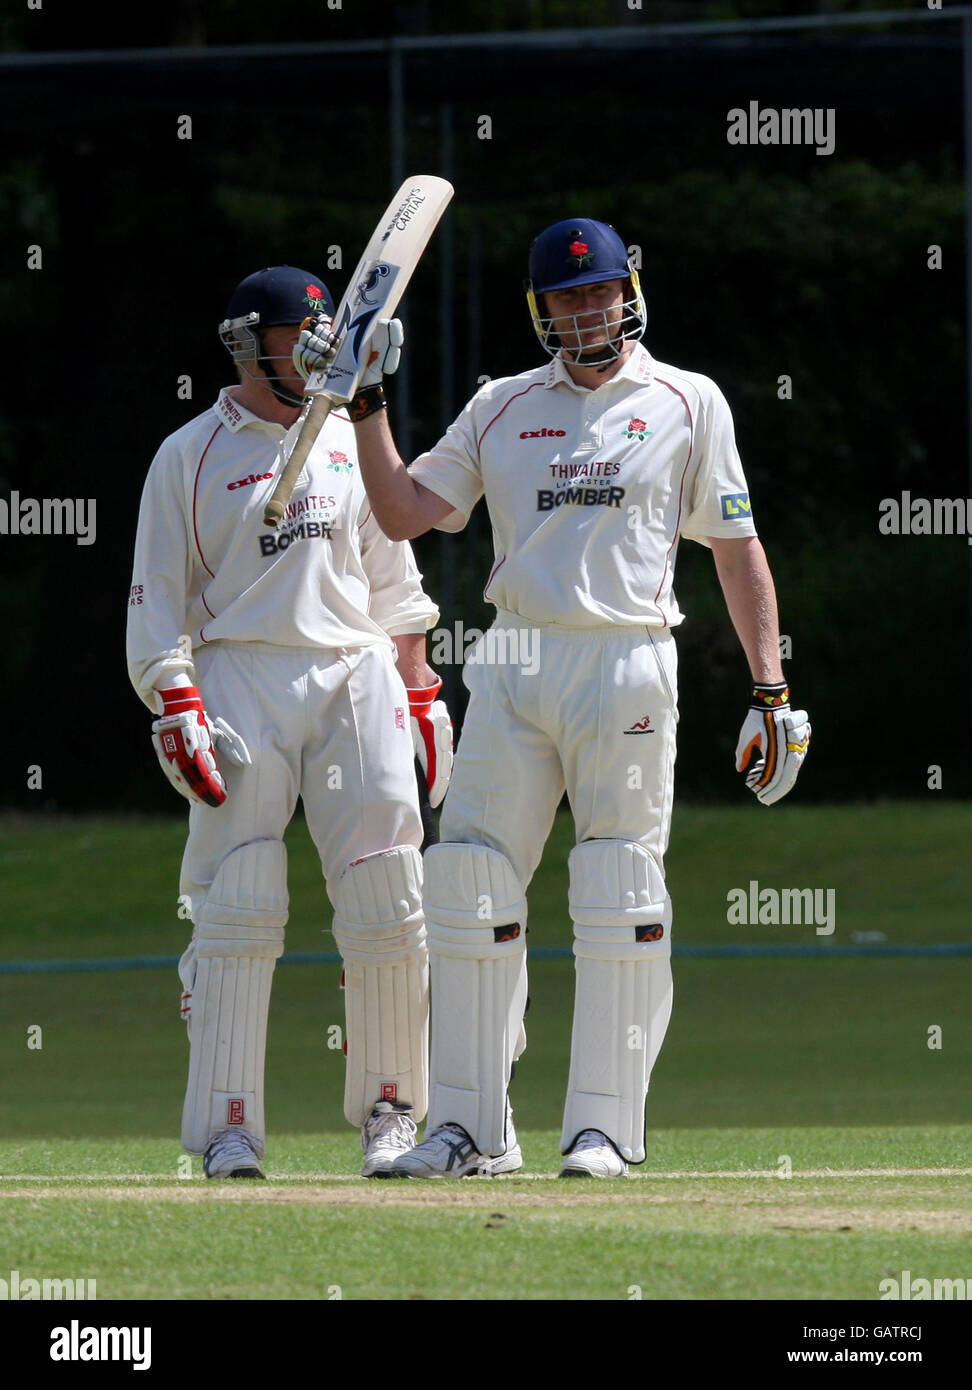 Lancashire's Andrew Flintoff celebrates reaching his half century during the Second XI County Championship match at Alderley Edge, Cheshire. Stock Photo